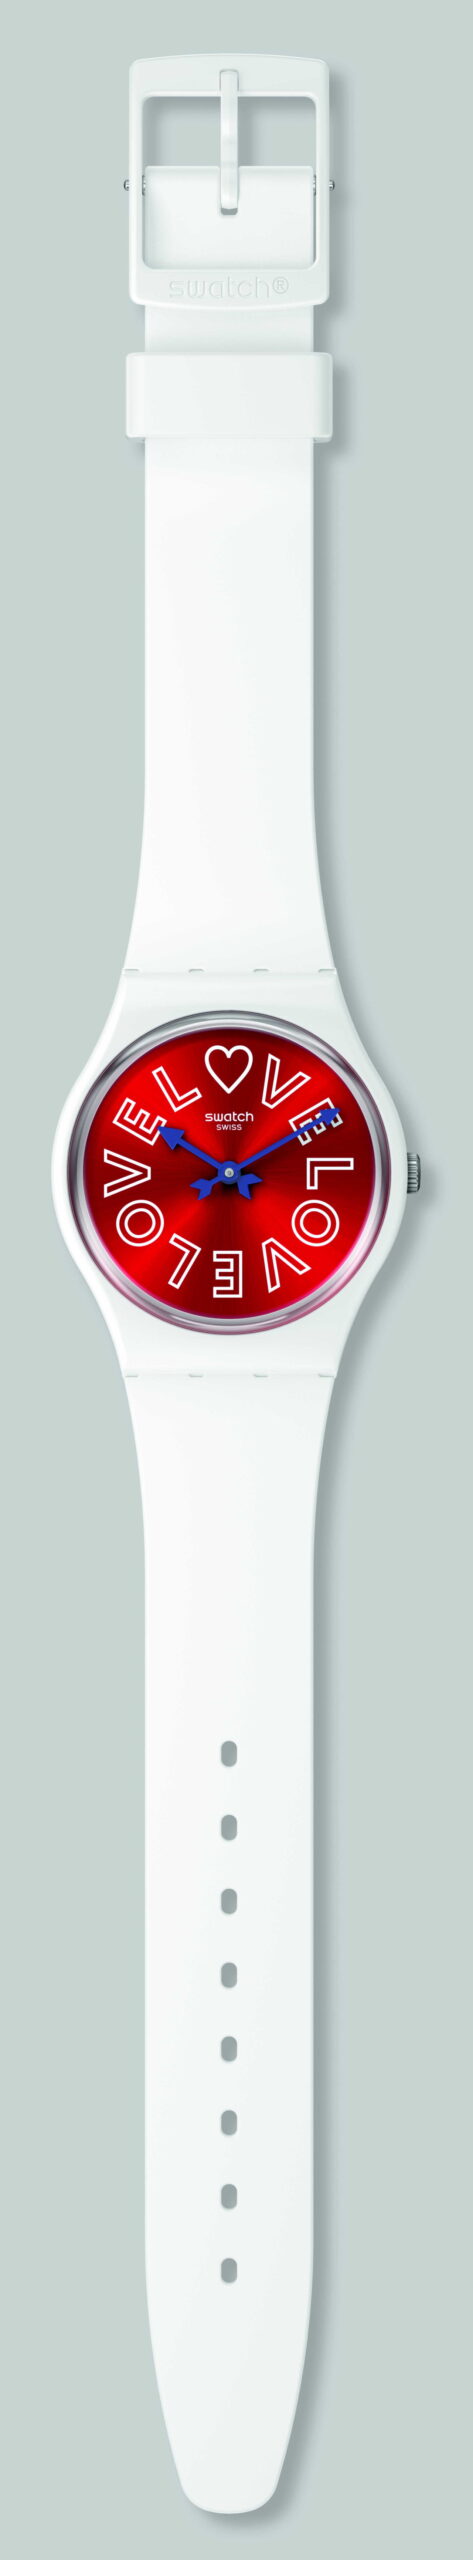 SWATCH RECIPE FOR LOVE